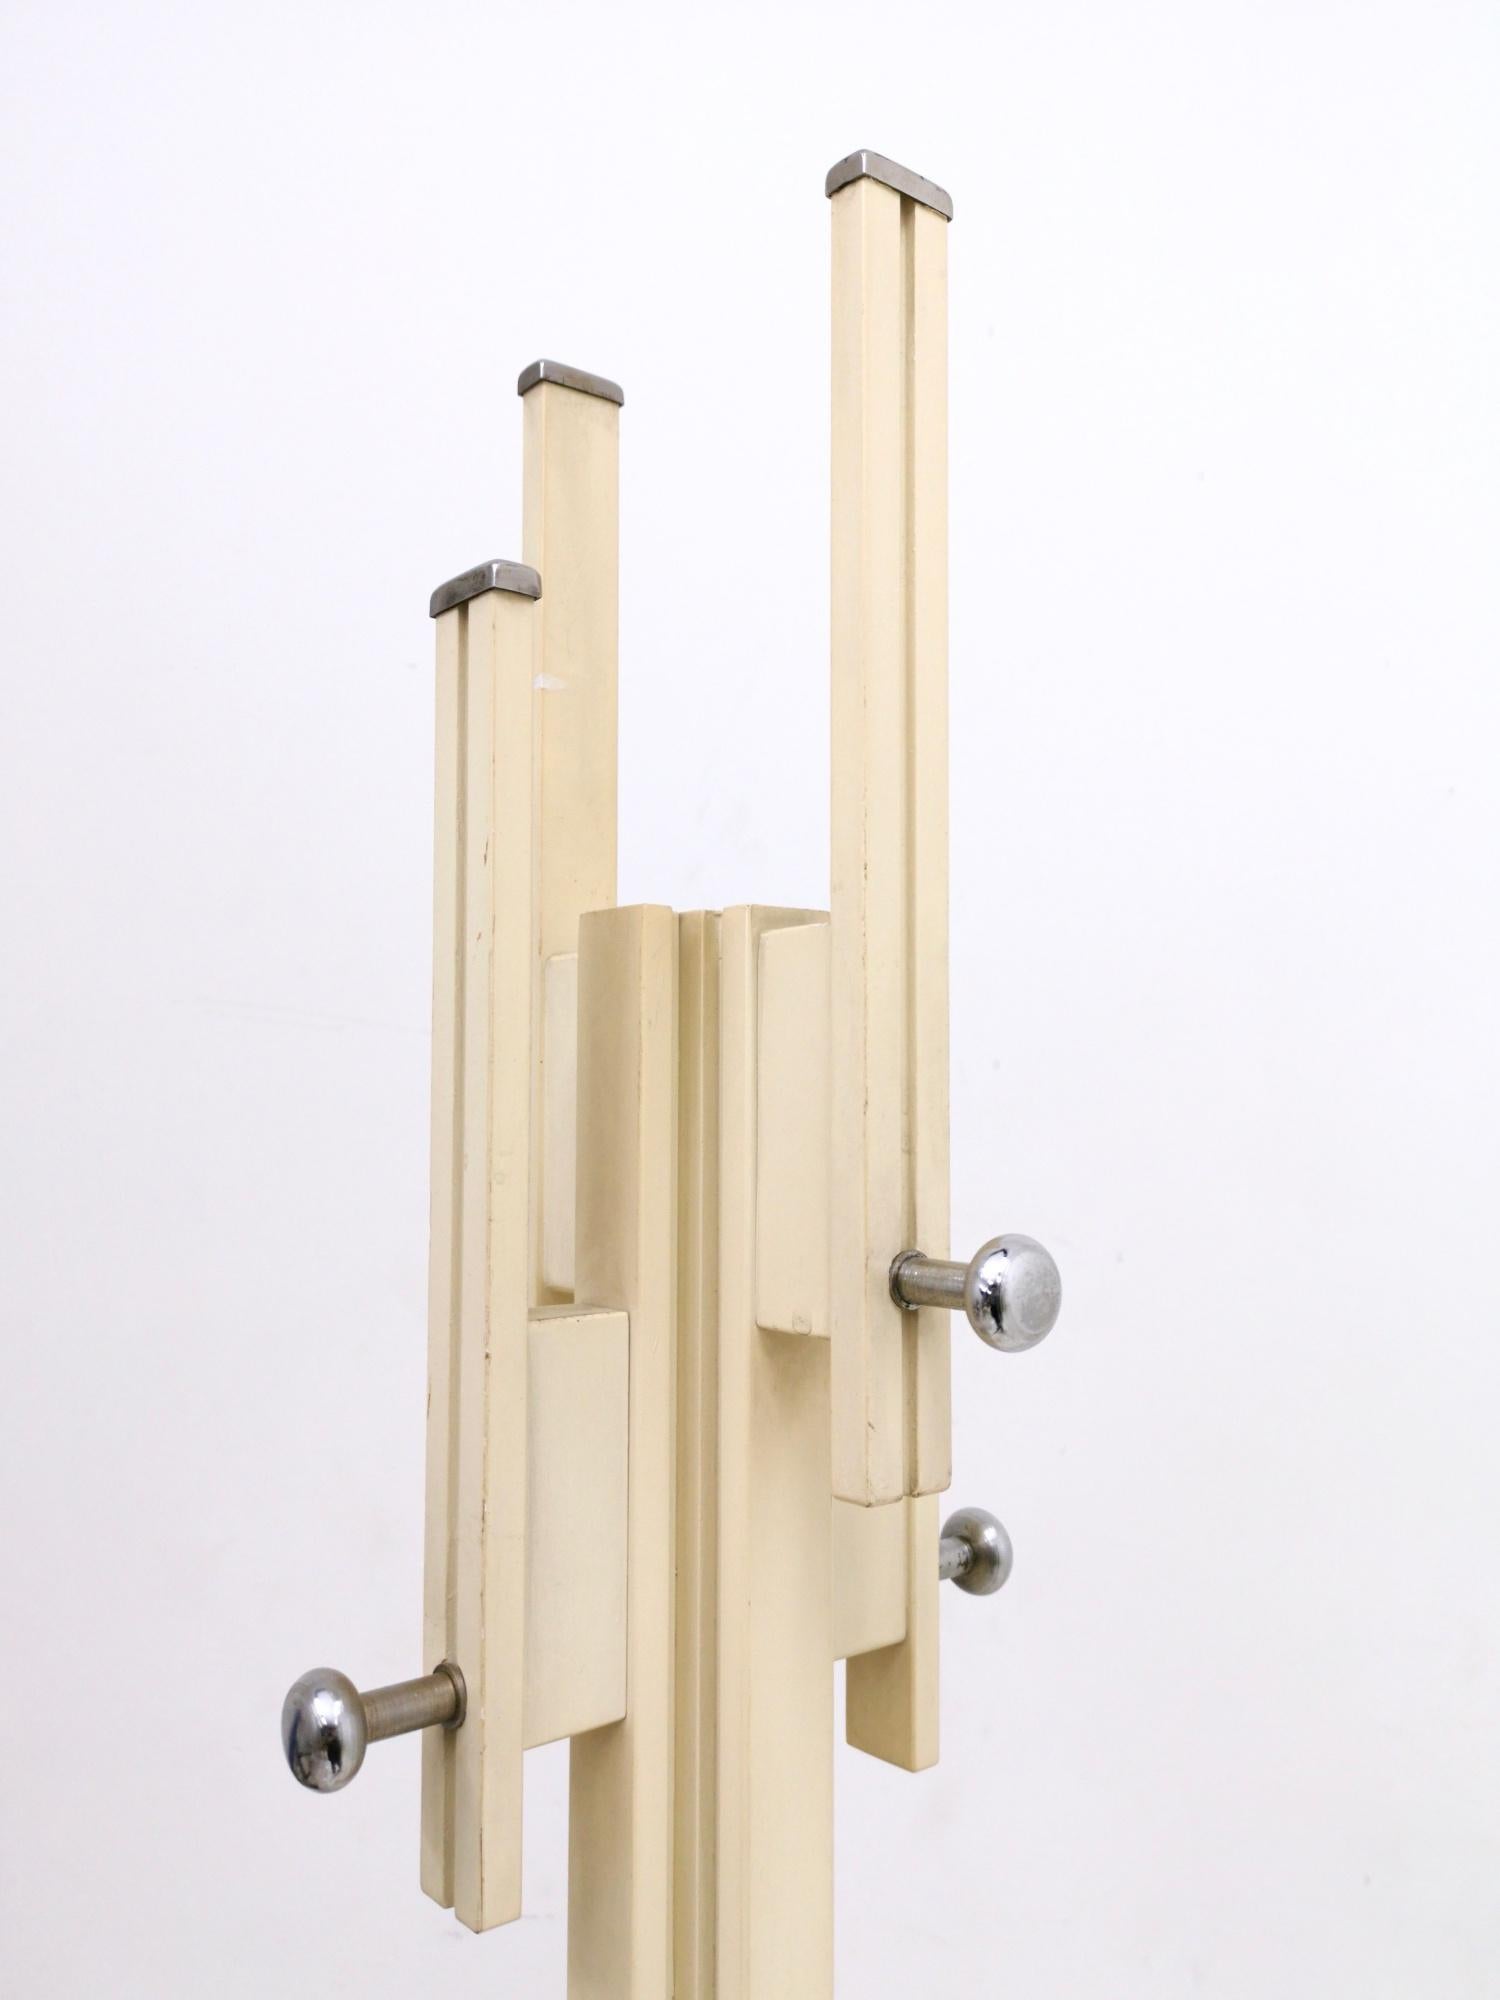 Mid-20th Century Ivory Lacquered Wood Coat Rack by Carlo de Carli for Fiarm, Italy, 1960s-1970s